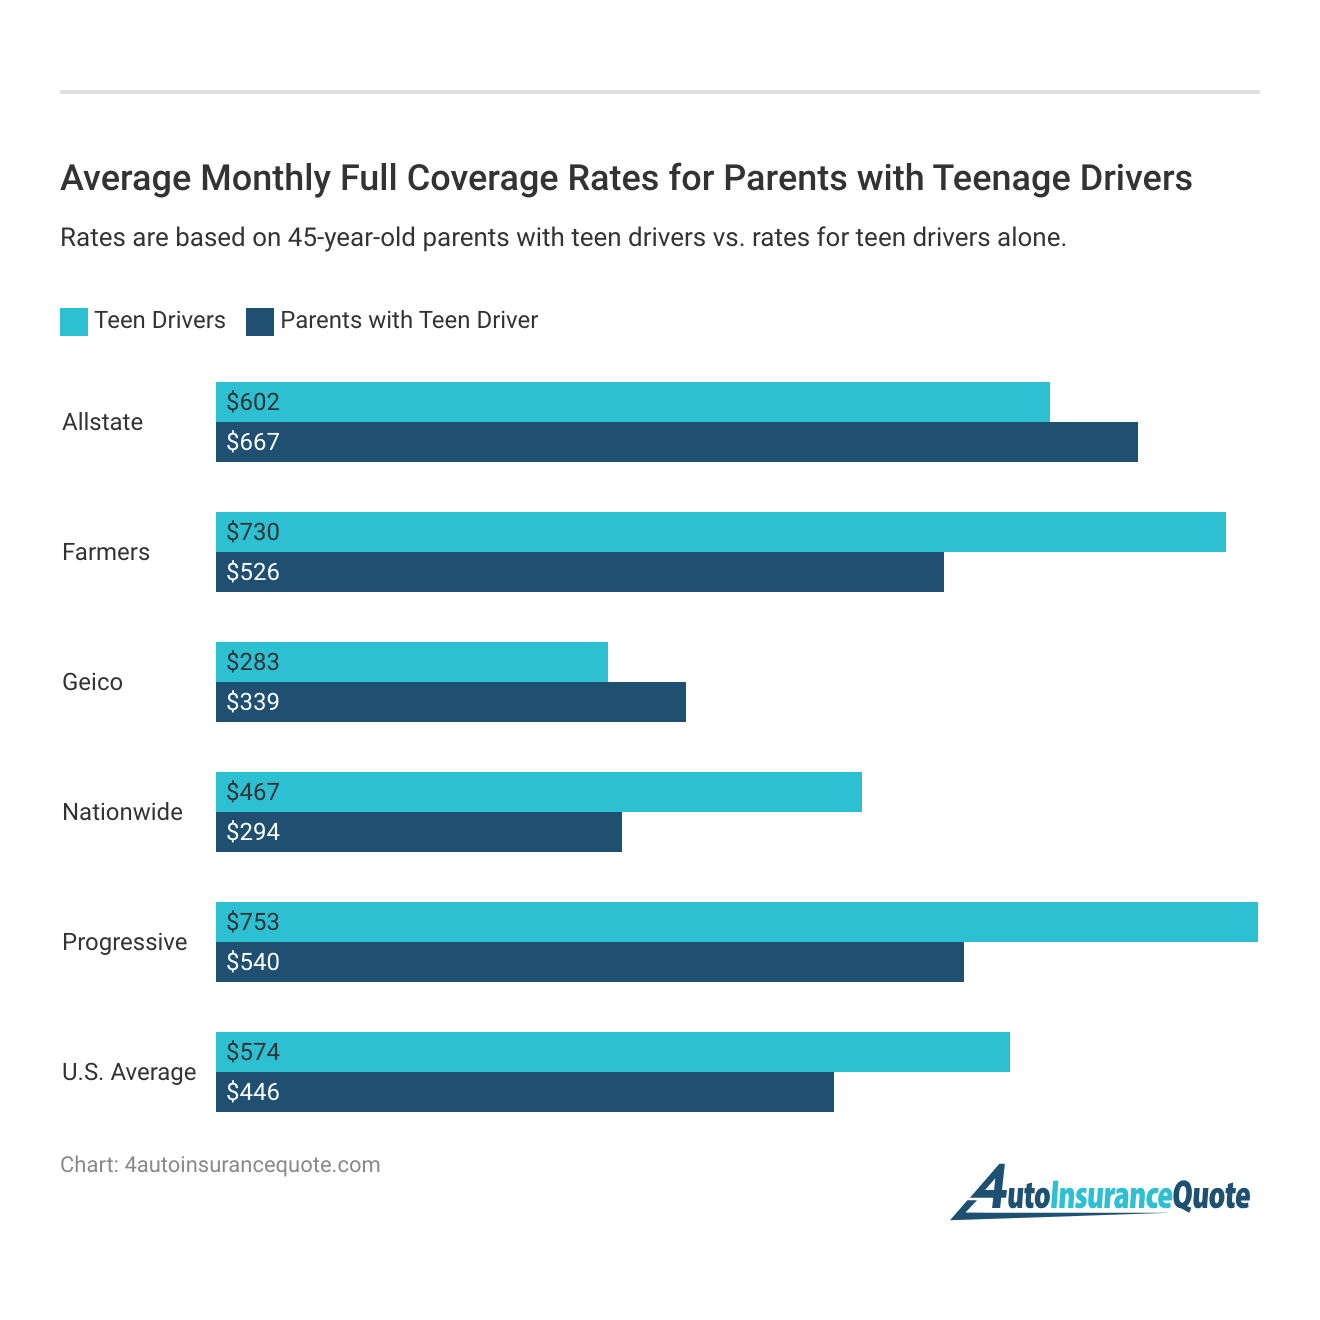 <h3>Average Monthly Full Coverage Rates for Parents with Teenage Drivers</h3>